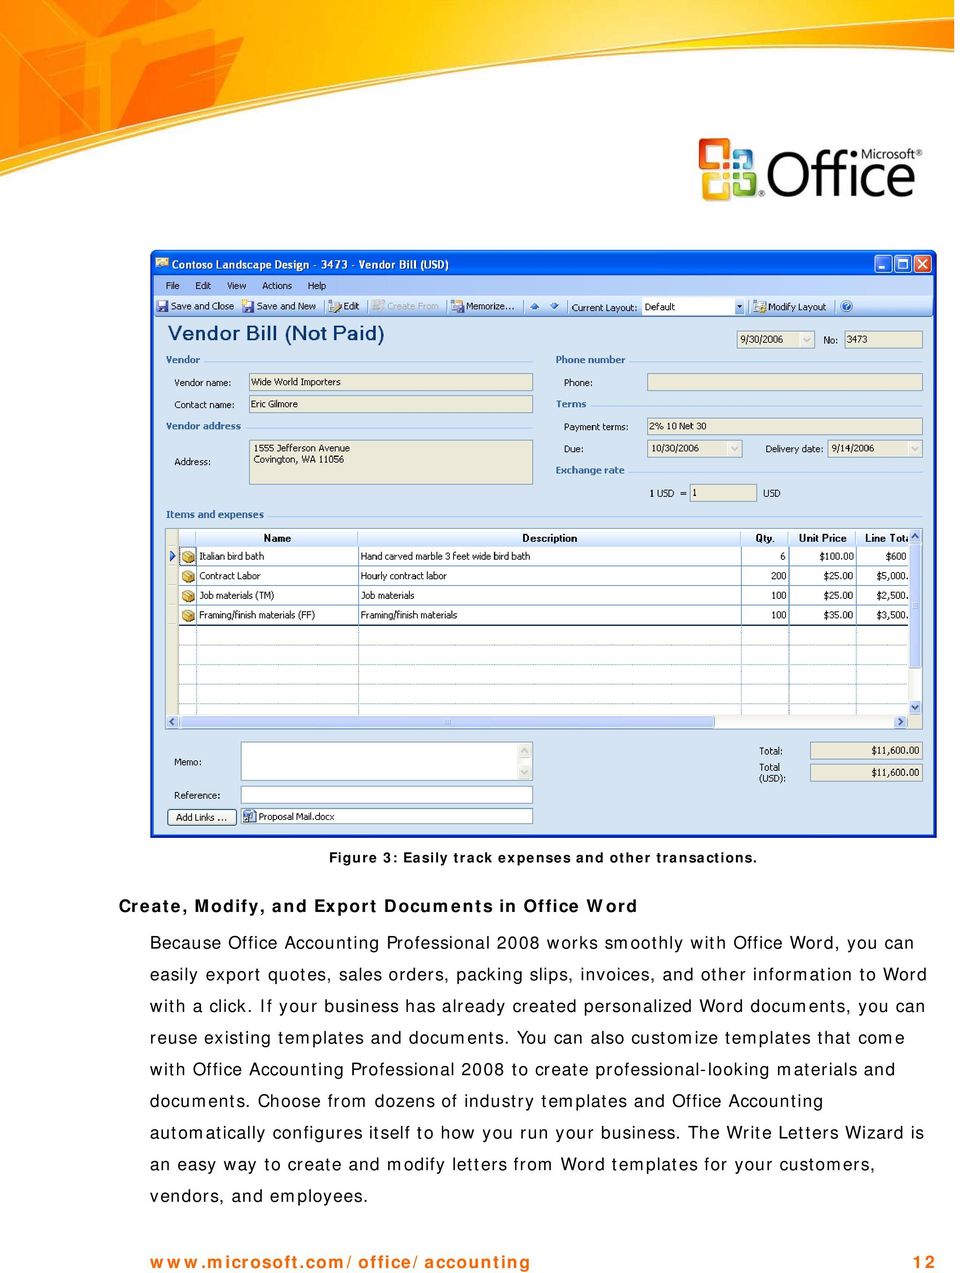 and other information to Word with a click. If your business has already created personalized Word documents, you can reuse existing templates and documents.